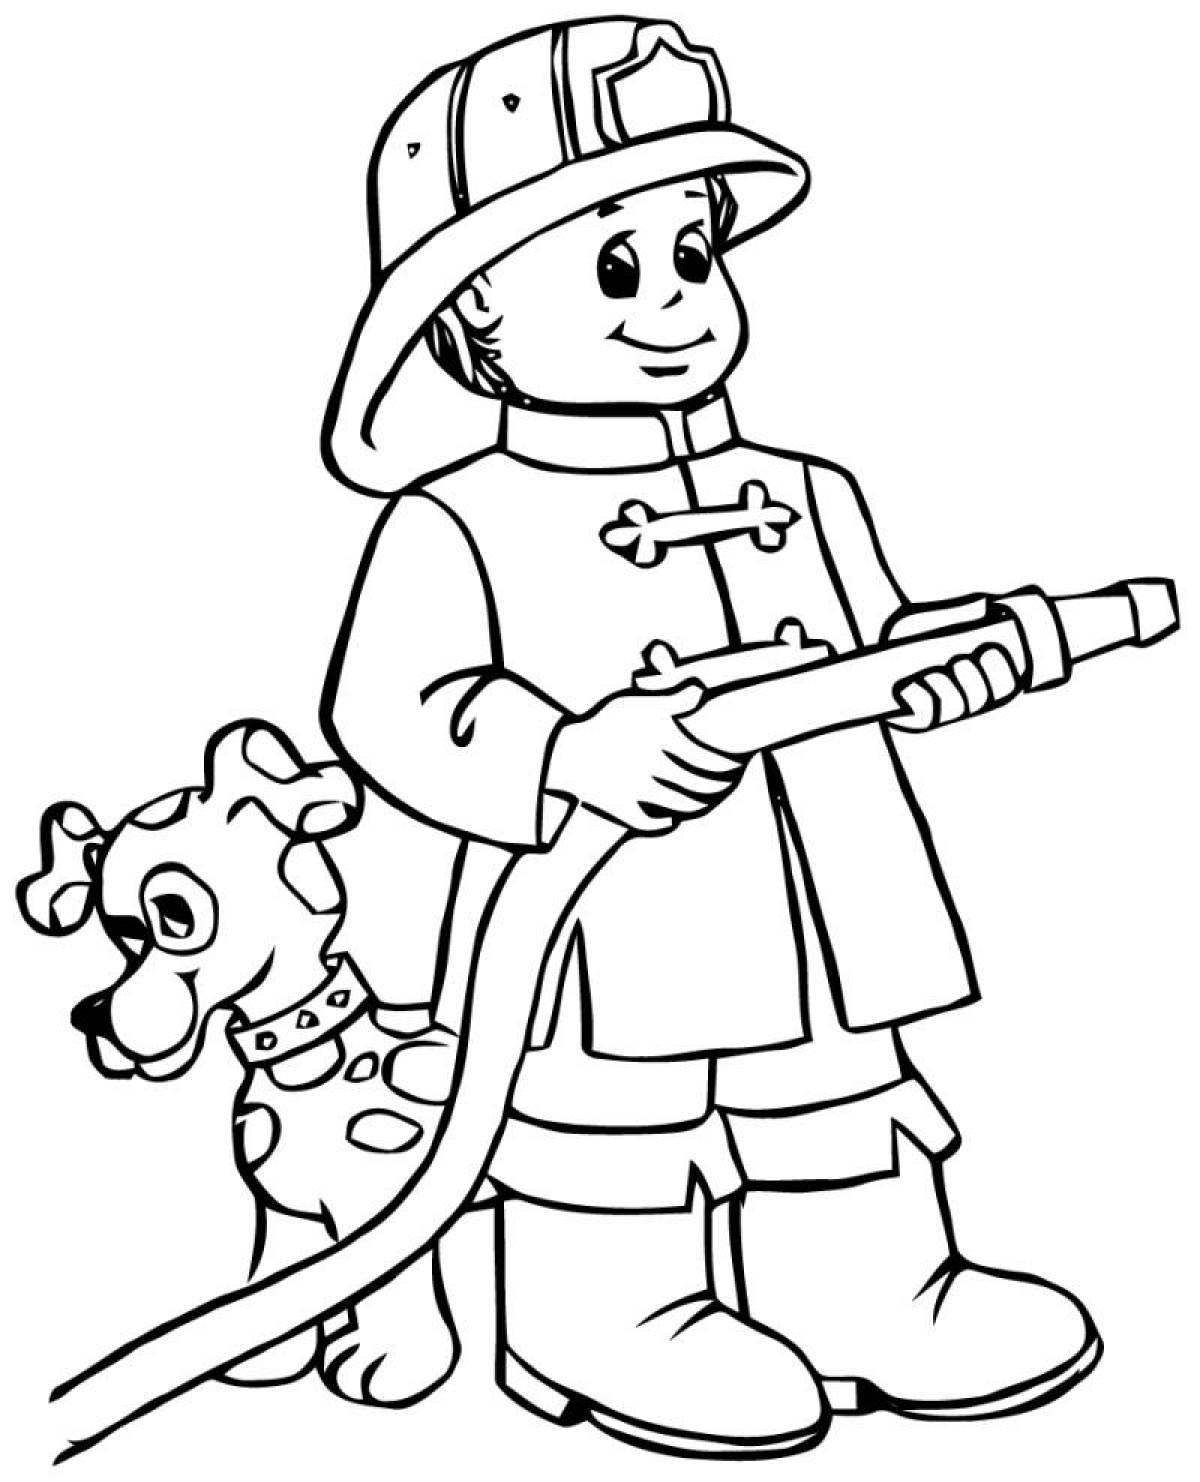 Adorable krumpets coloring page